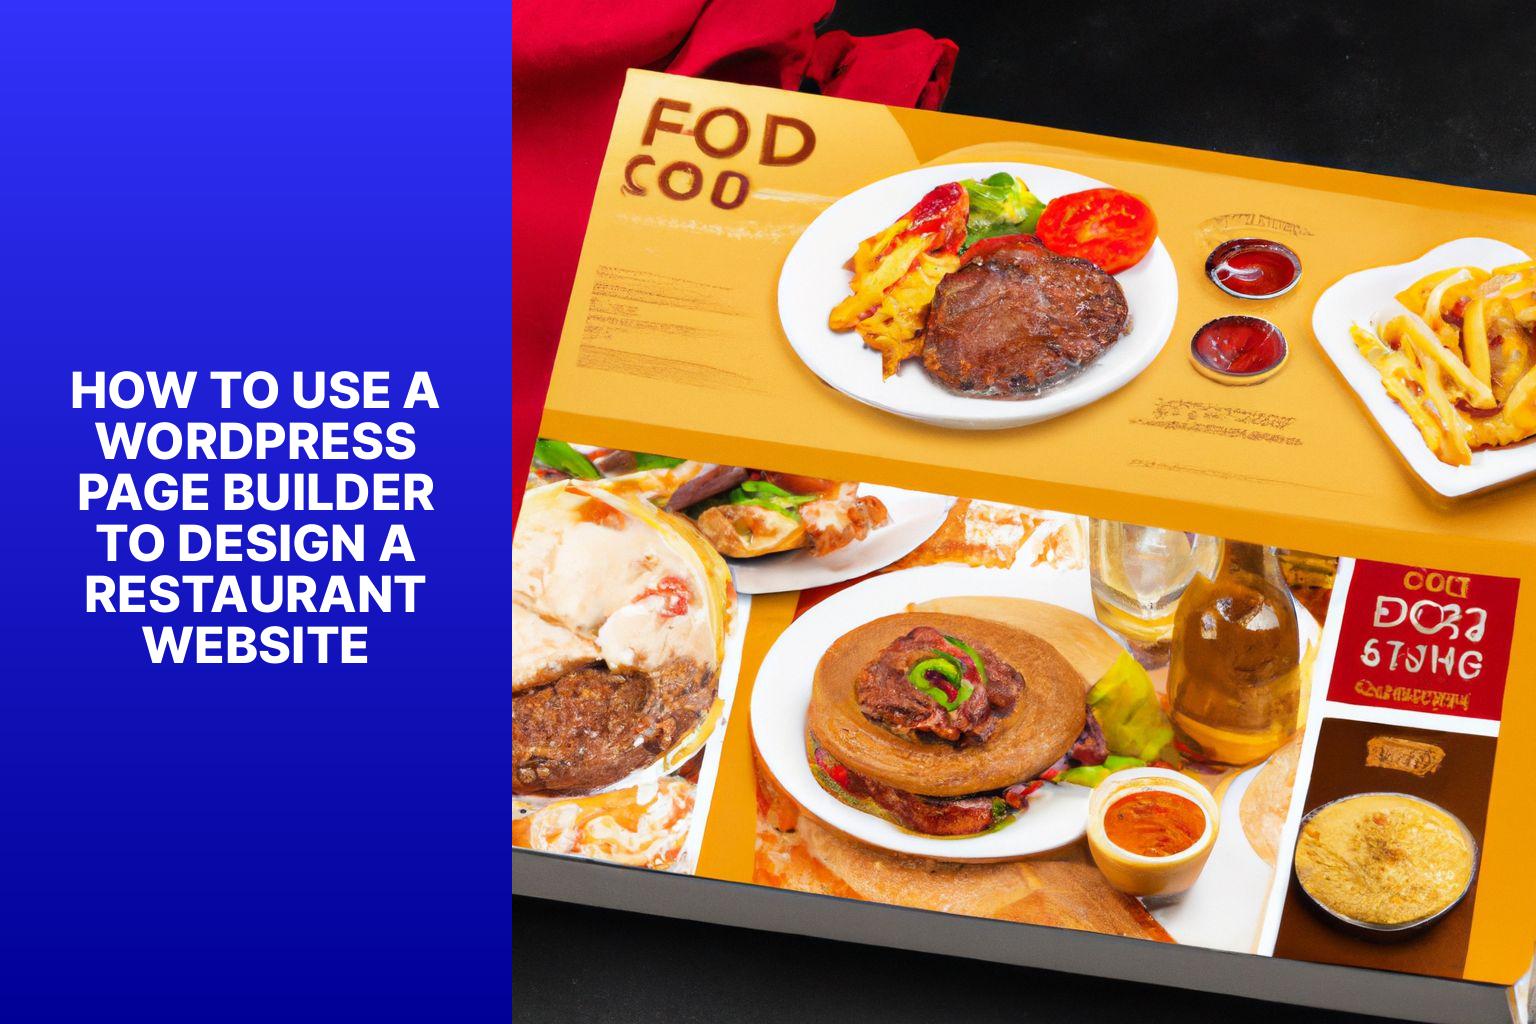 How to Use a WordPress Page Builder to Design a Restaurant Website